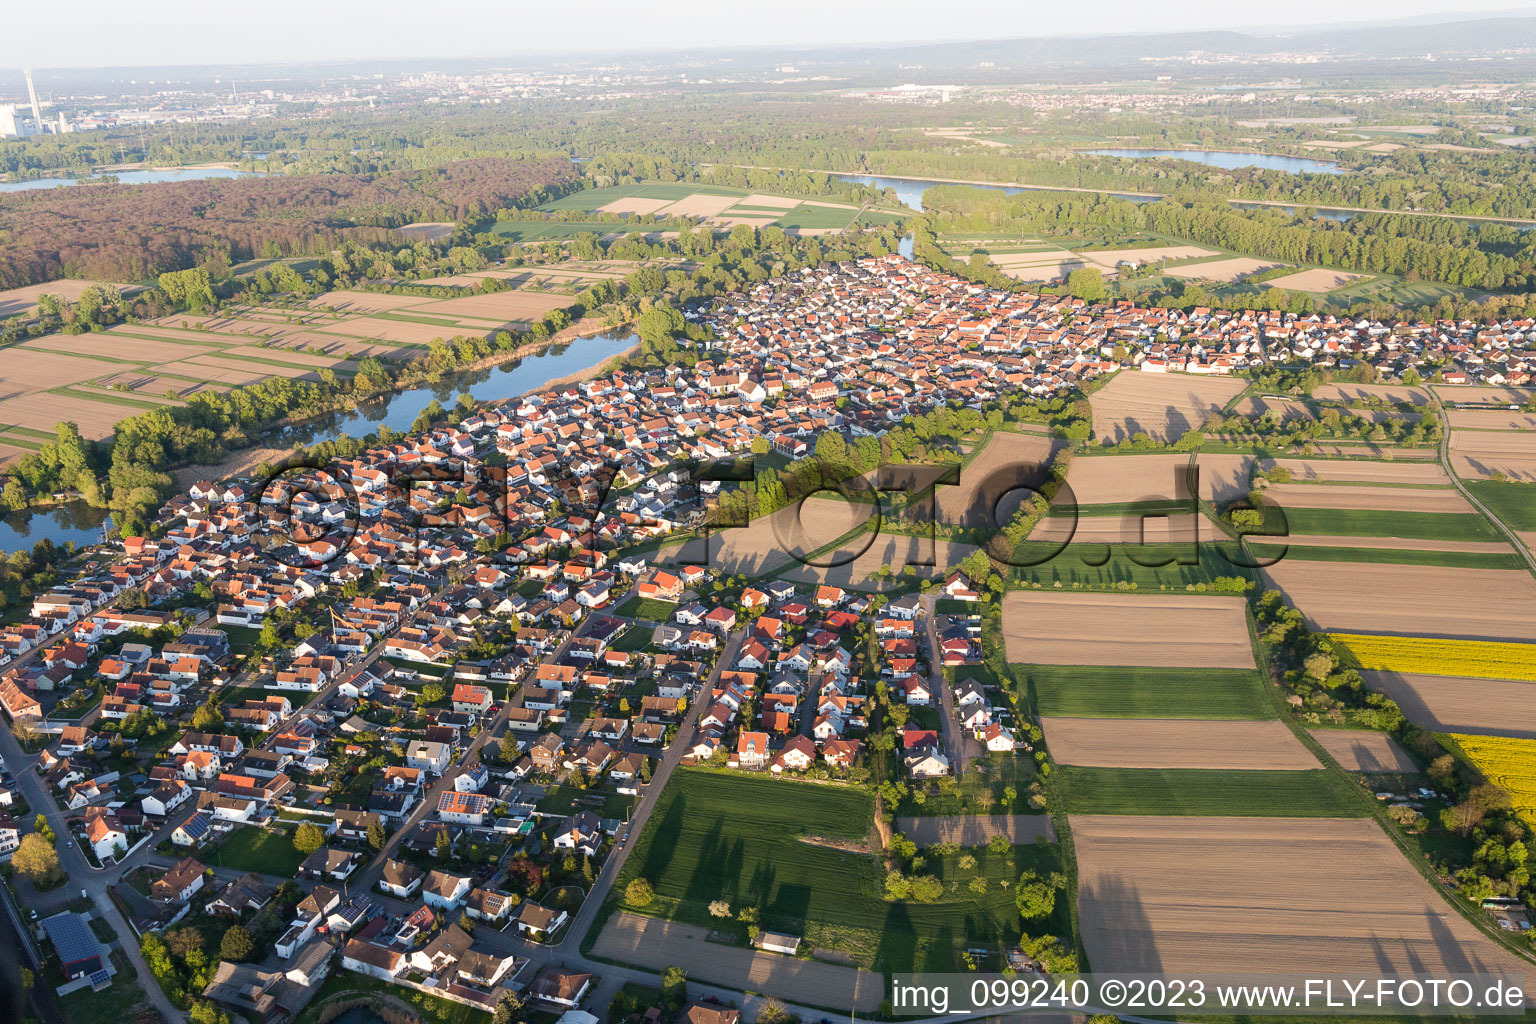 Neuburg in the state Rhineland-Palatinate, Germany from the drone perspective